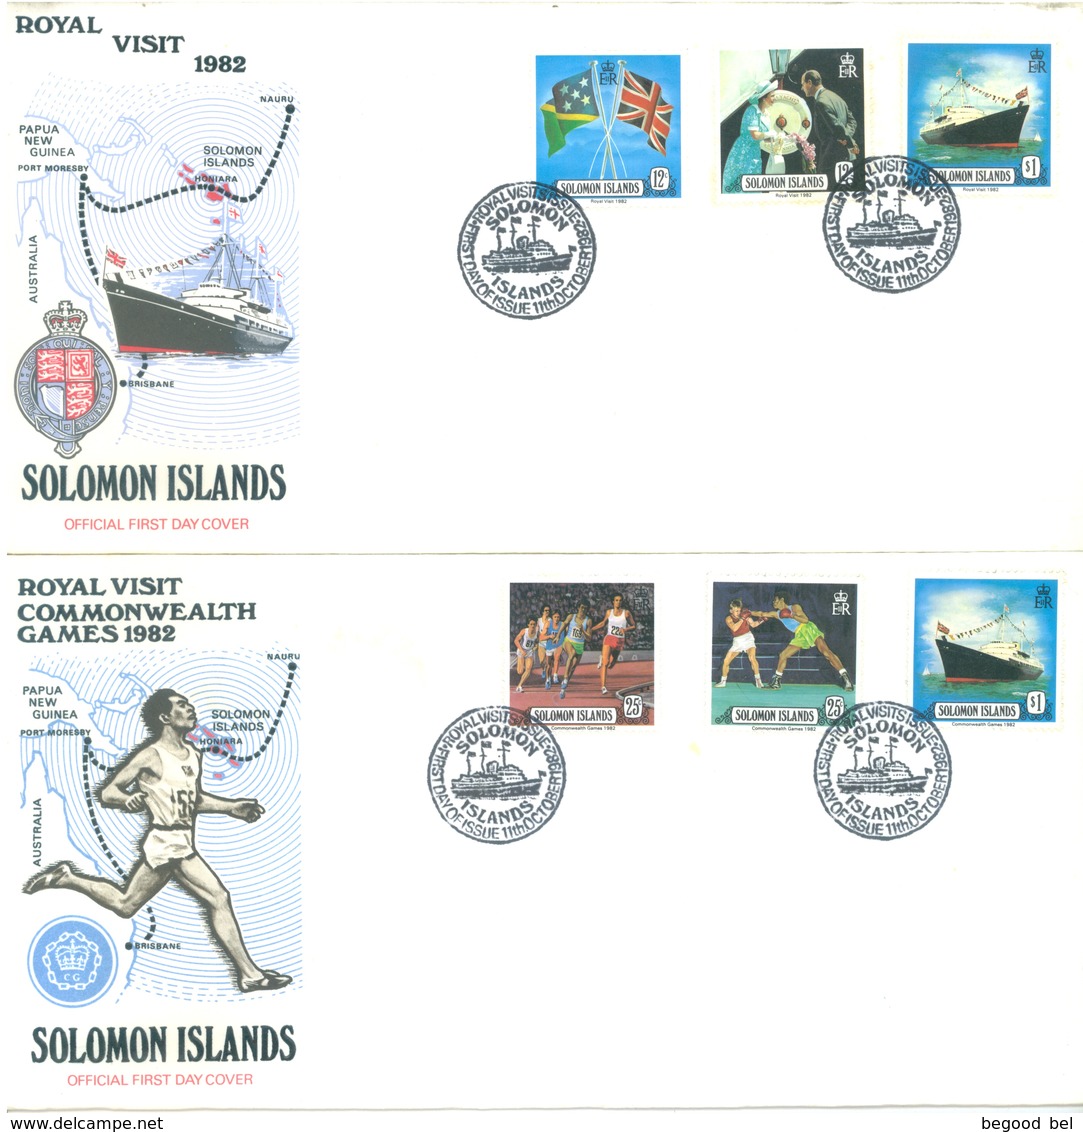 SOLOMON ISLANDS - FDC - 11.10.1982 - ROYAL VISIT - Yv 461-464 STAMPS OF BLOC 10 AND 11 - Lot 17540 - Salomon (Iles 1978-...)